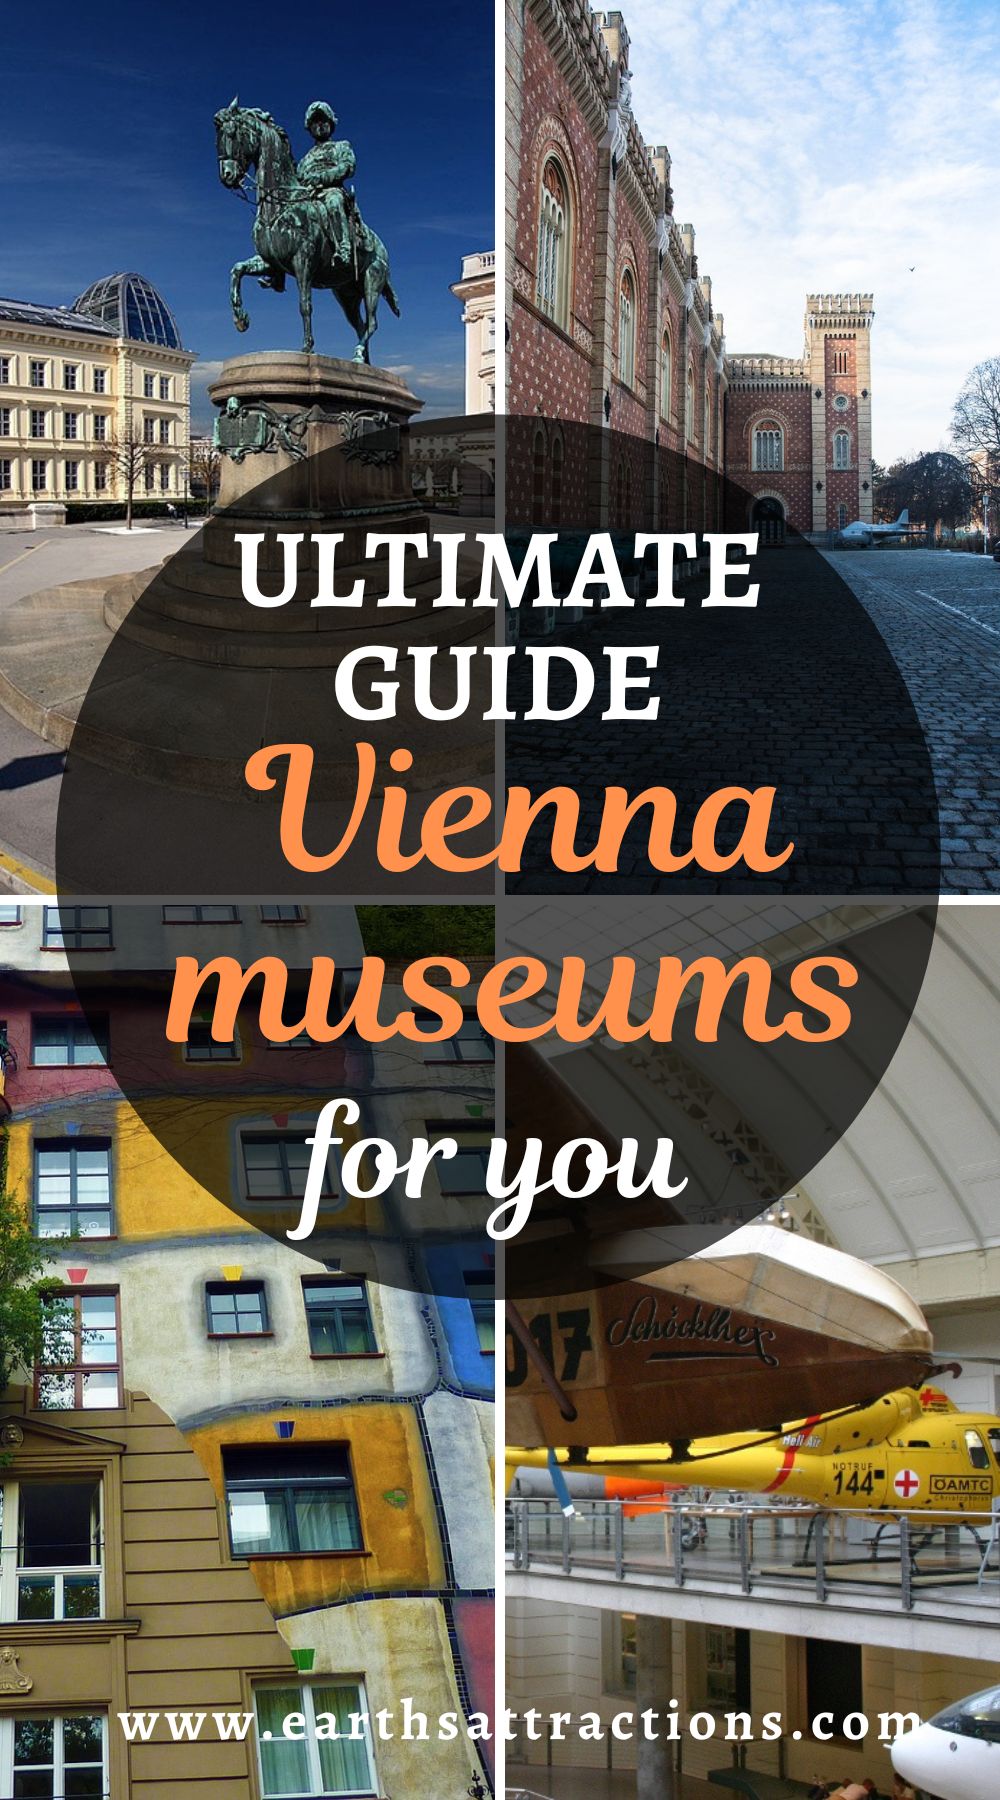 The ultimate guide to the best museums to visit in Vienna. These are also some of the best places to visit in Vienna and things to do in Vienna, Austria #vienna #austria #europe #viennatravel #viennamuseums #europetravel #traveldestination #history #art #culture #fun #music